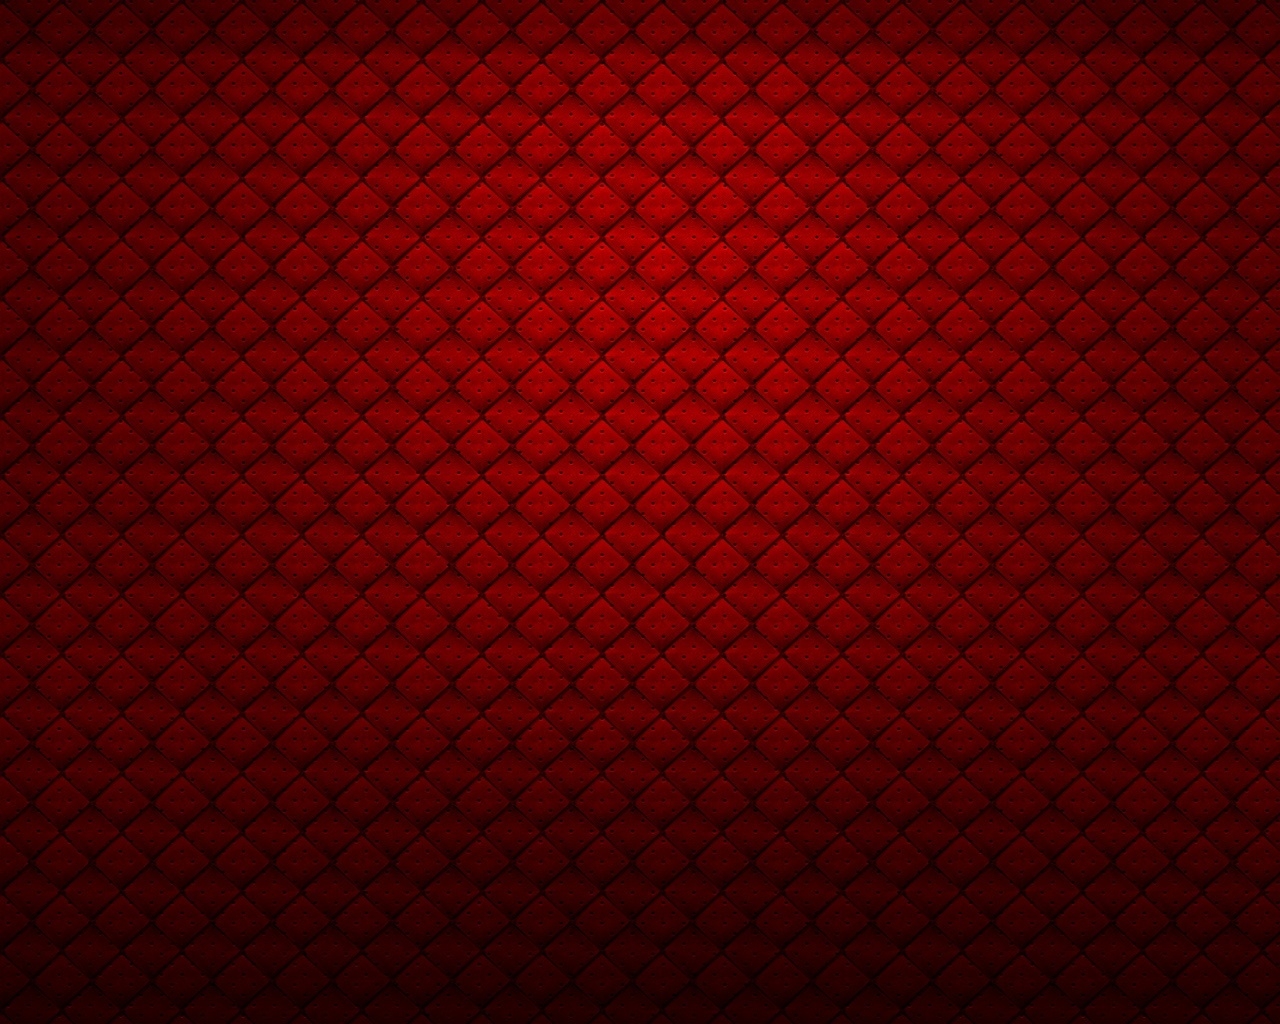 Still in Red for 1280 x 1024 resolution